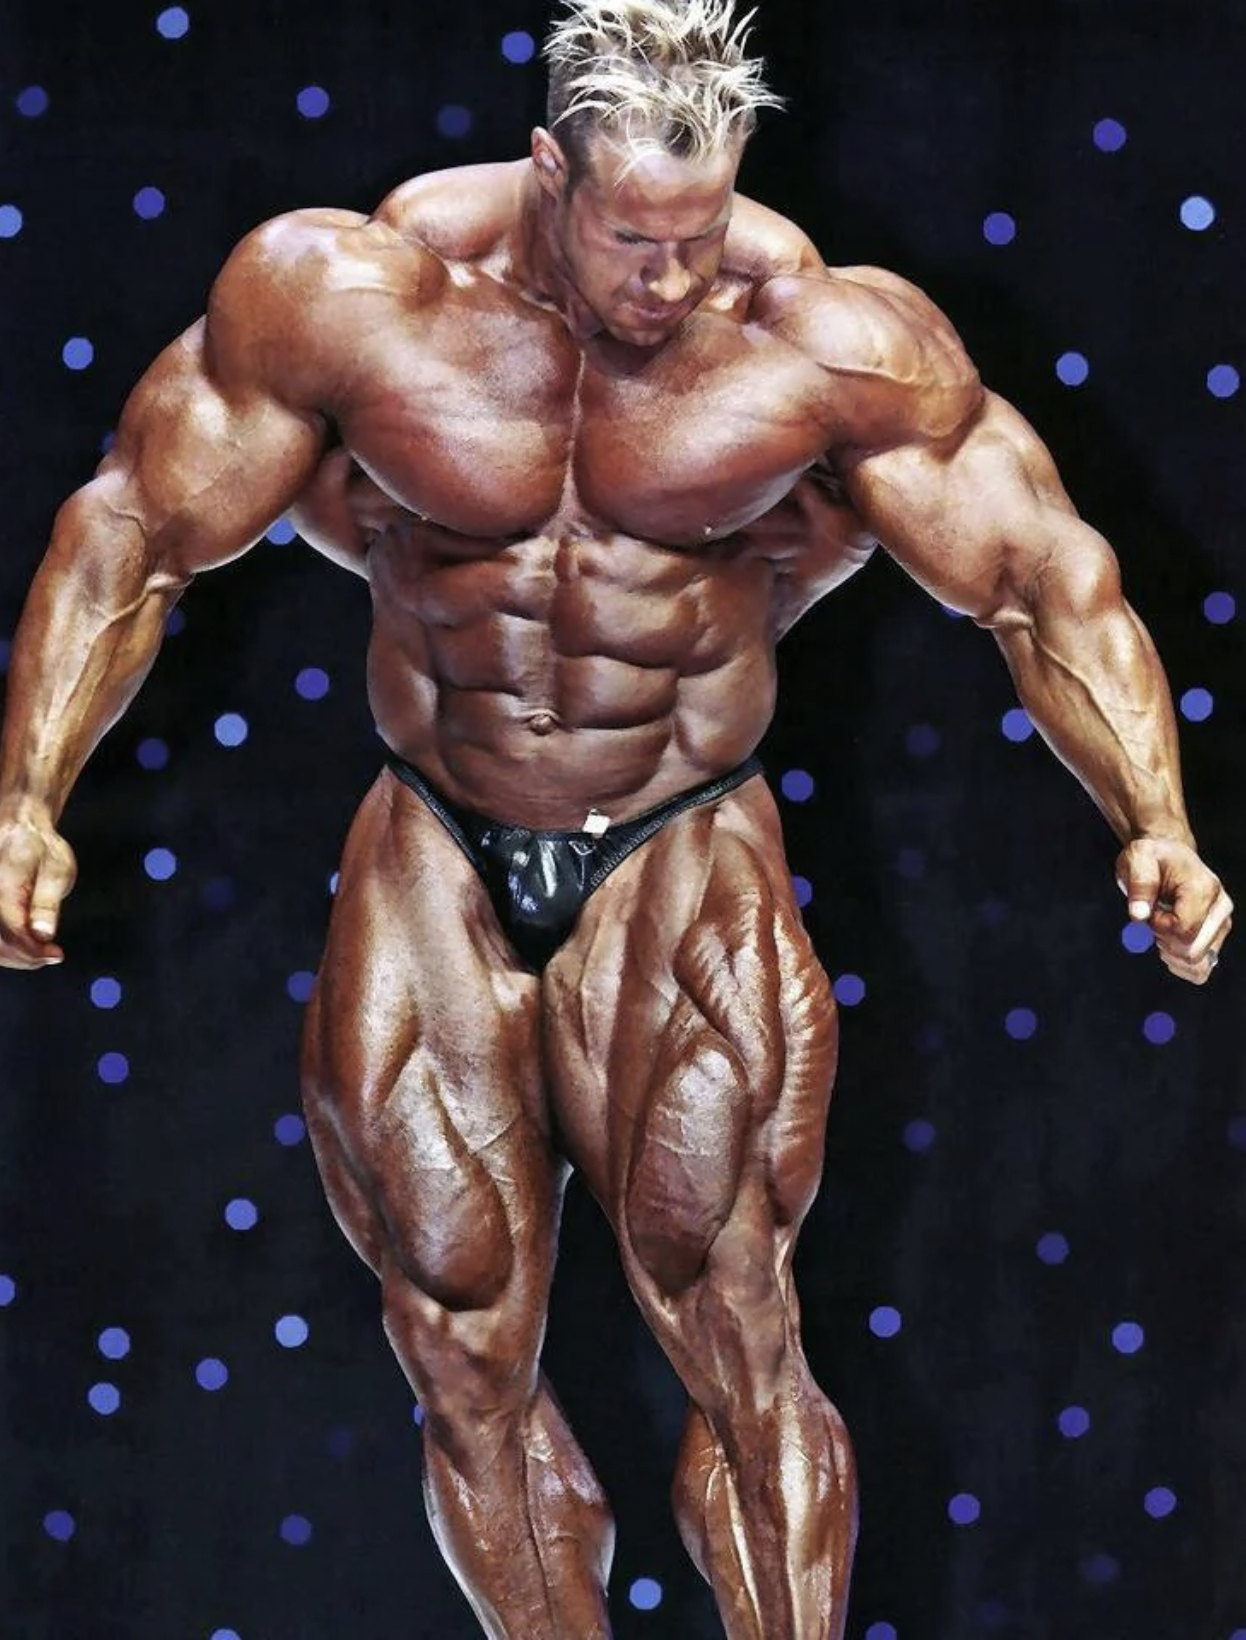 The Incredible Career of Jay Cutler, the Four-Time Mr. Olympia